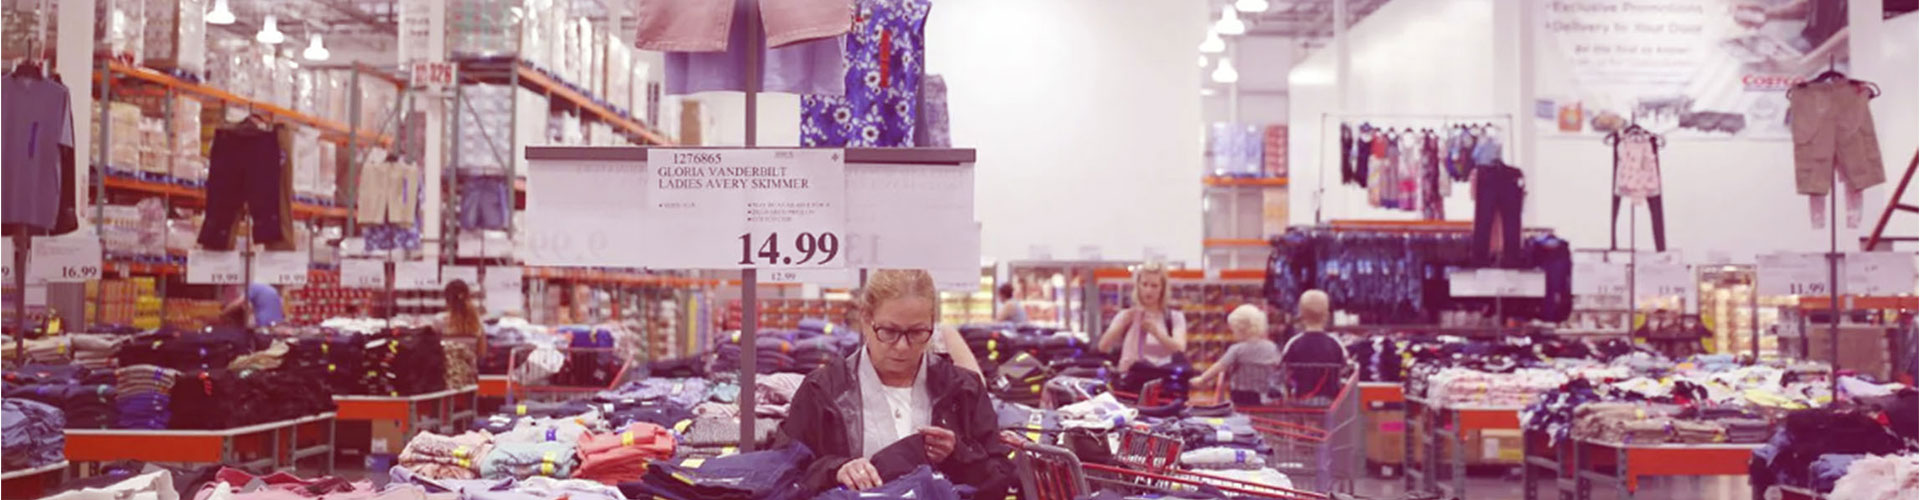 Blog banner featuring clothing section of Costco Wholesale